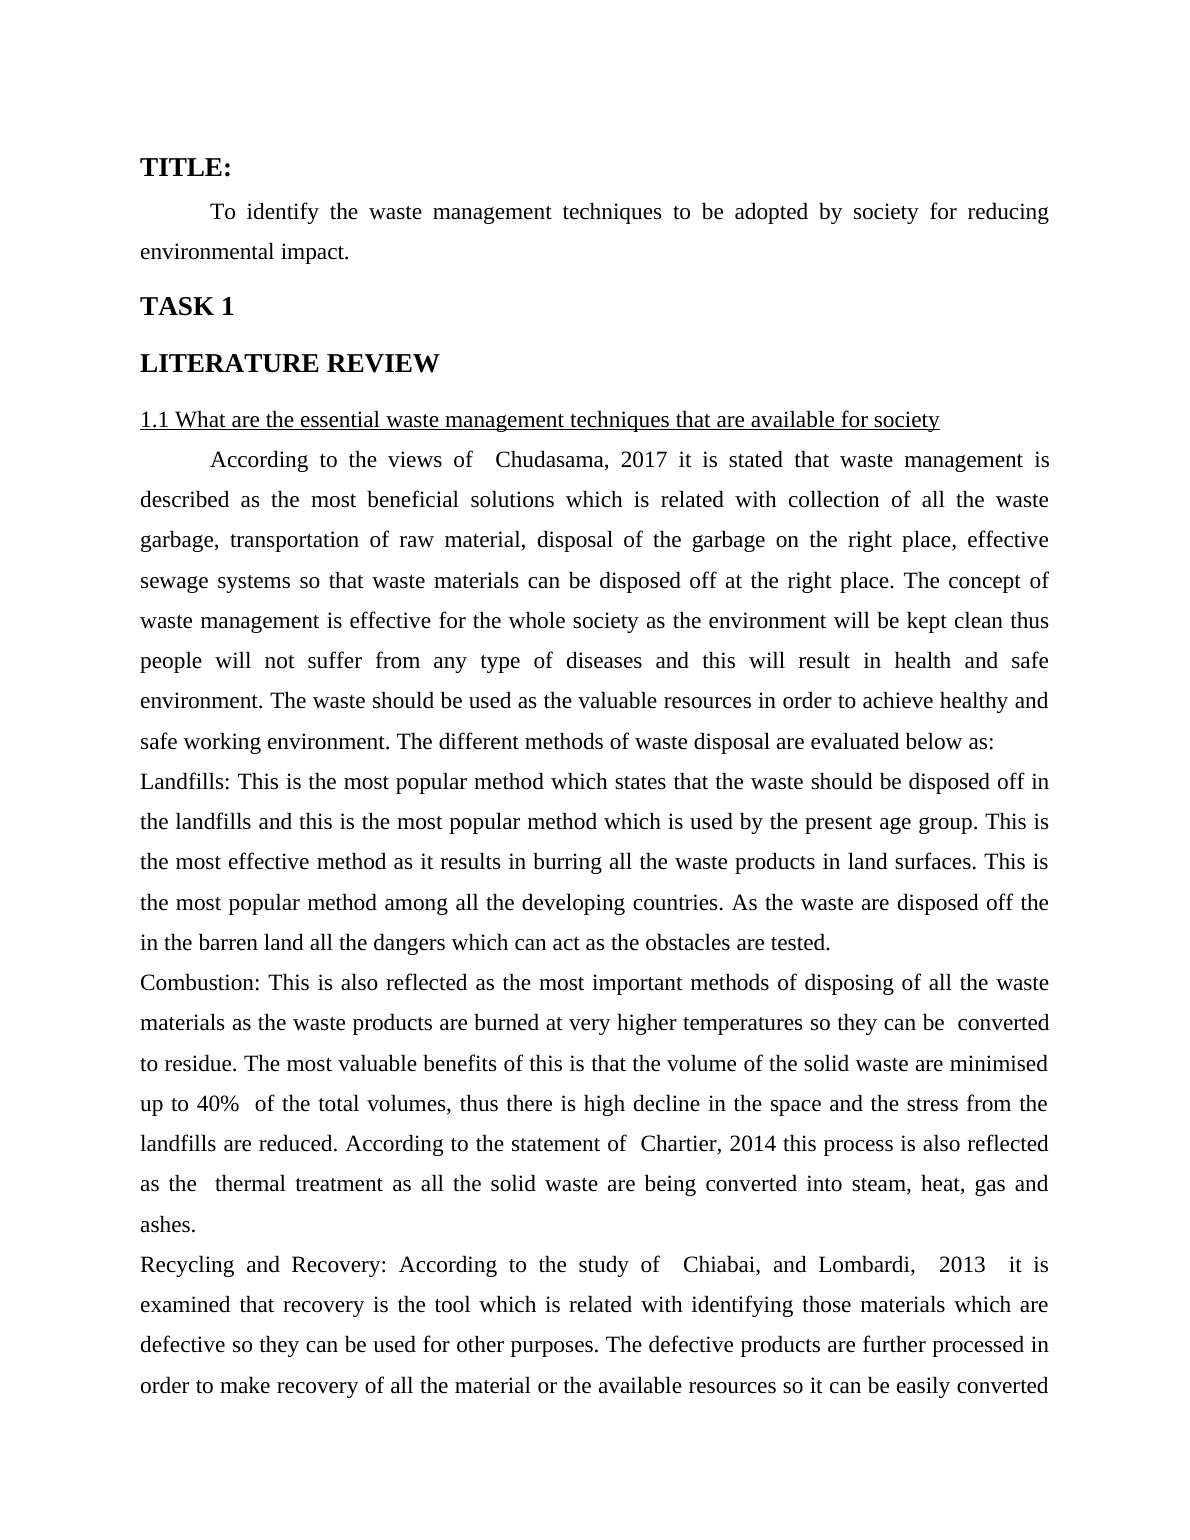 Report on Concept of Waste Management_3